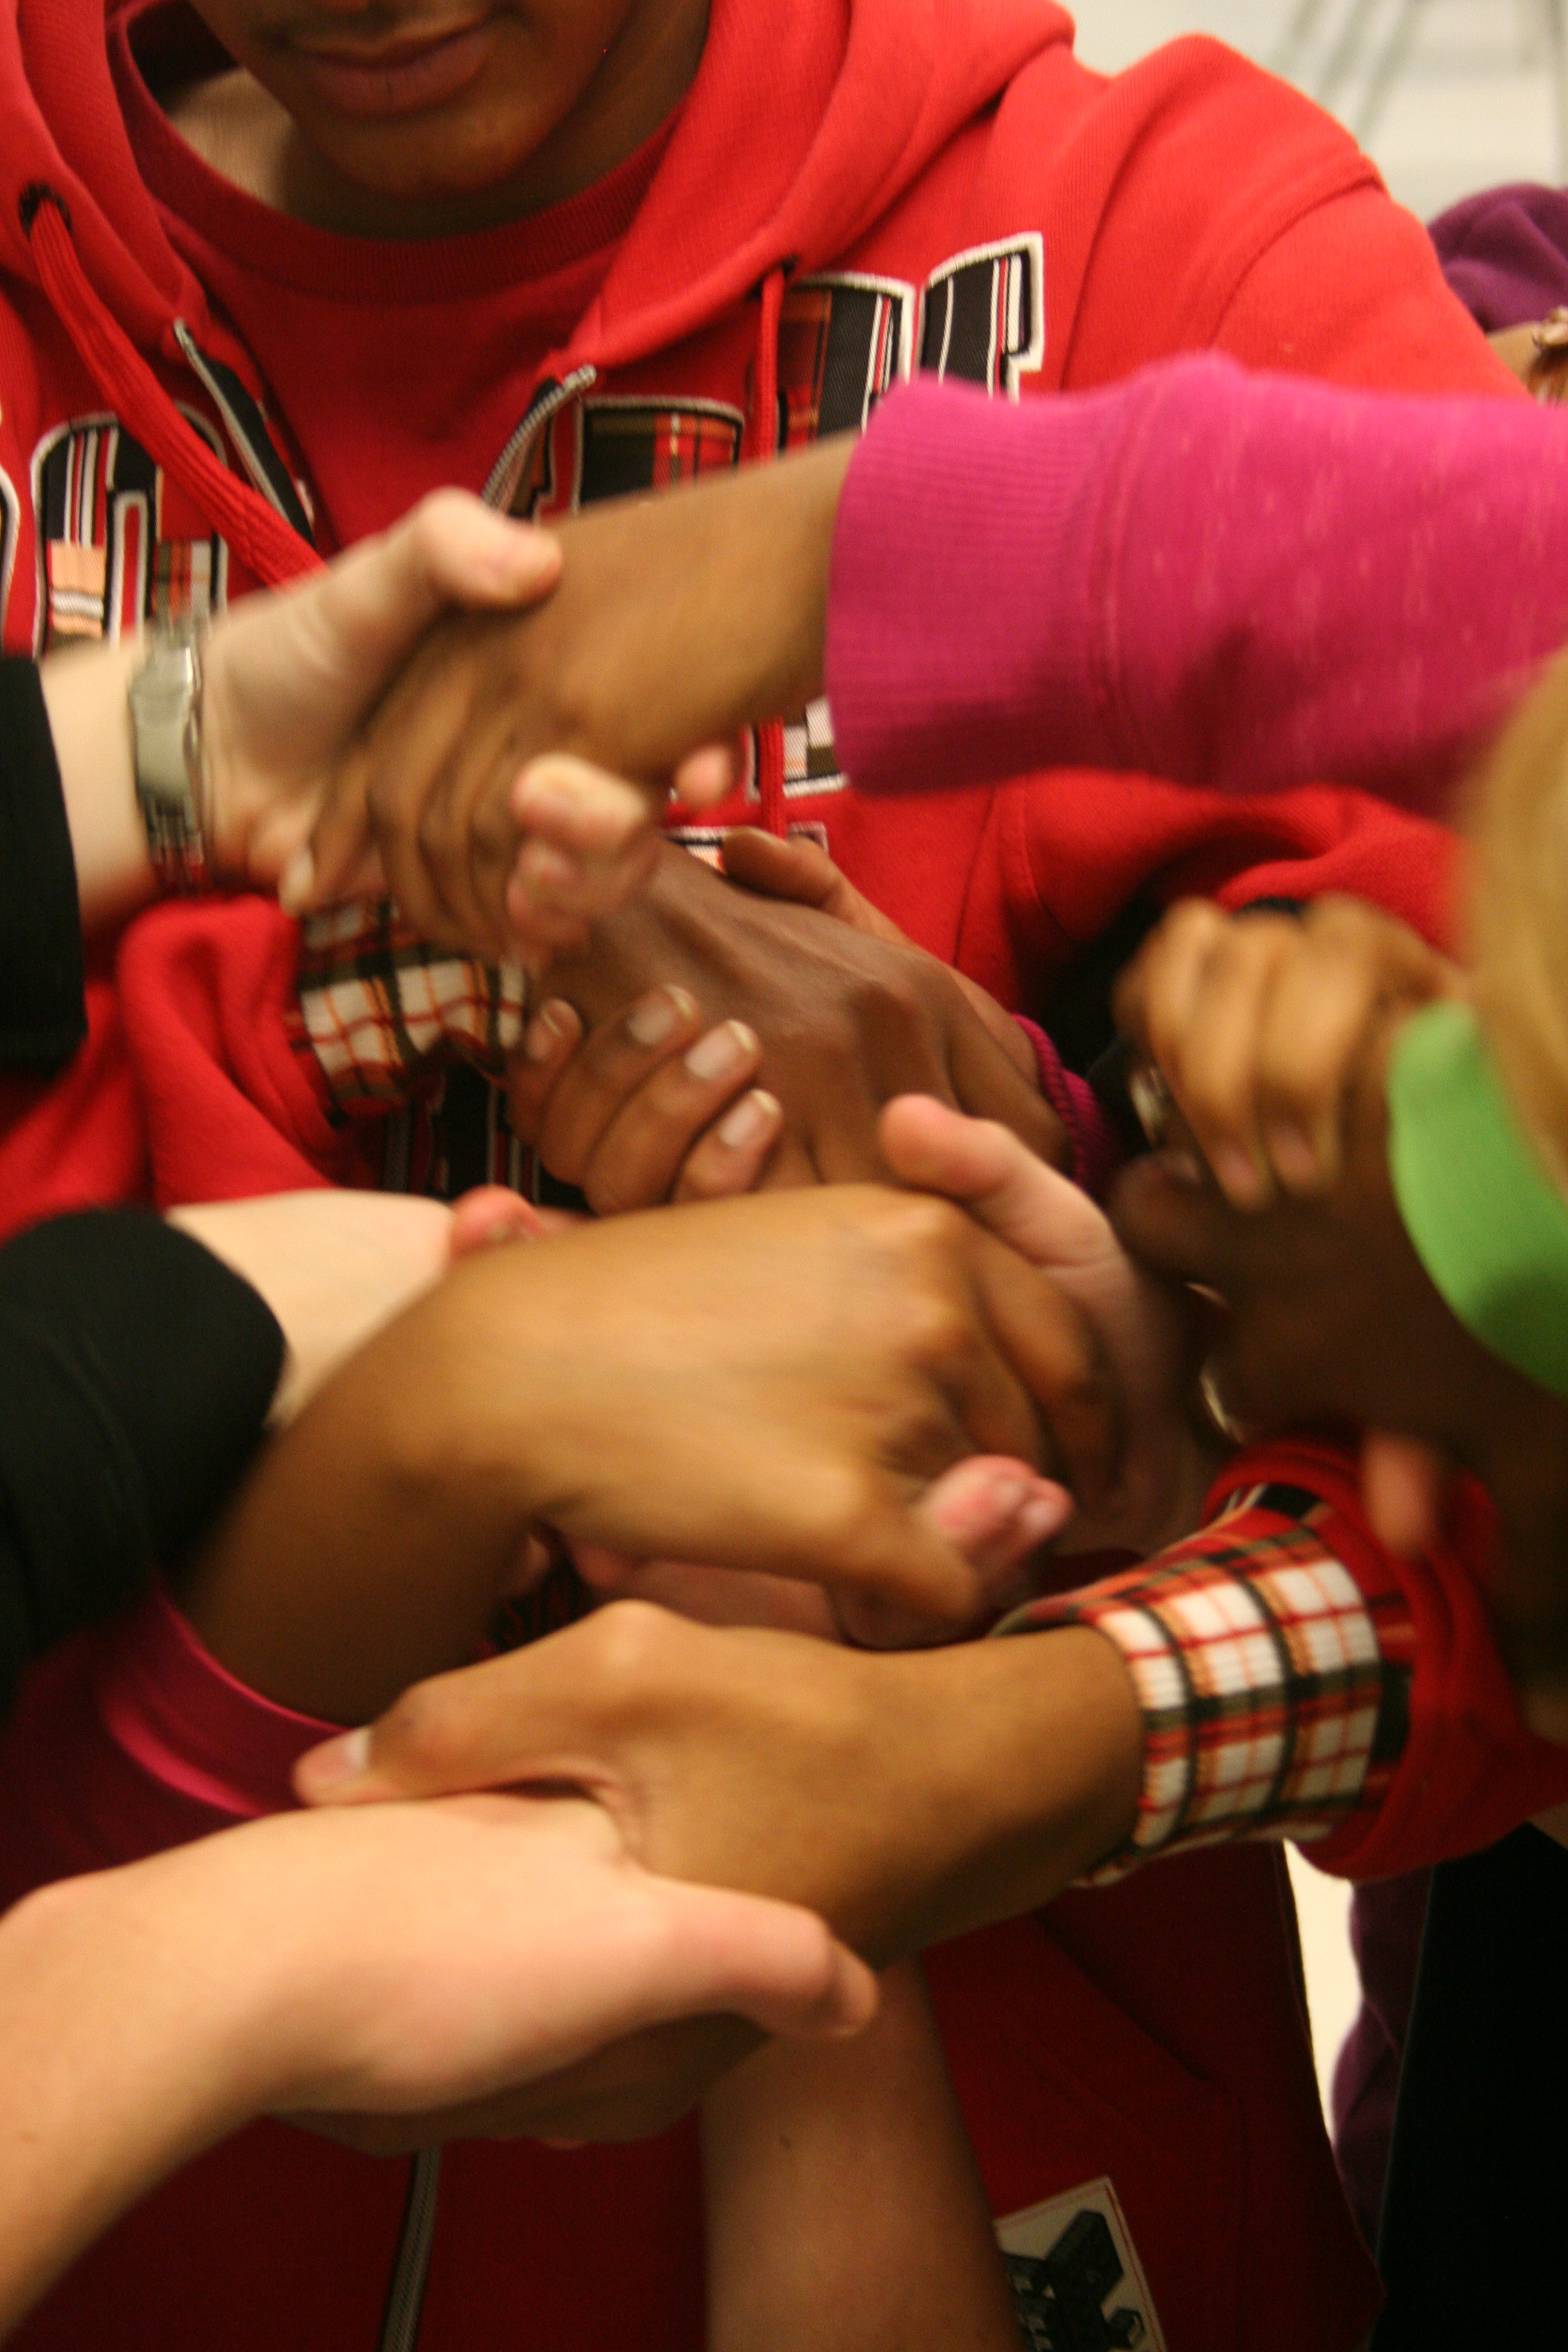 A group of people are holding each other’s hands.